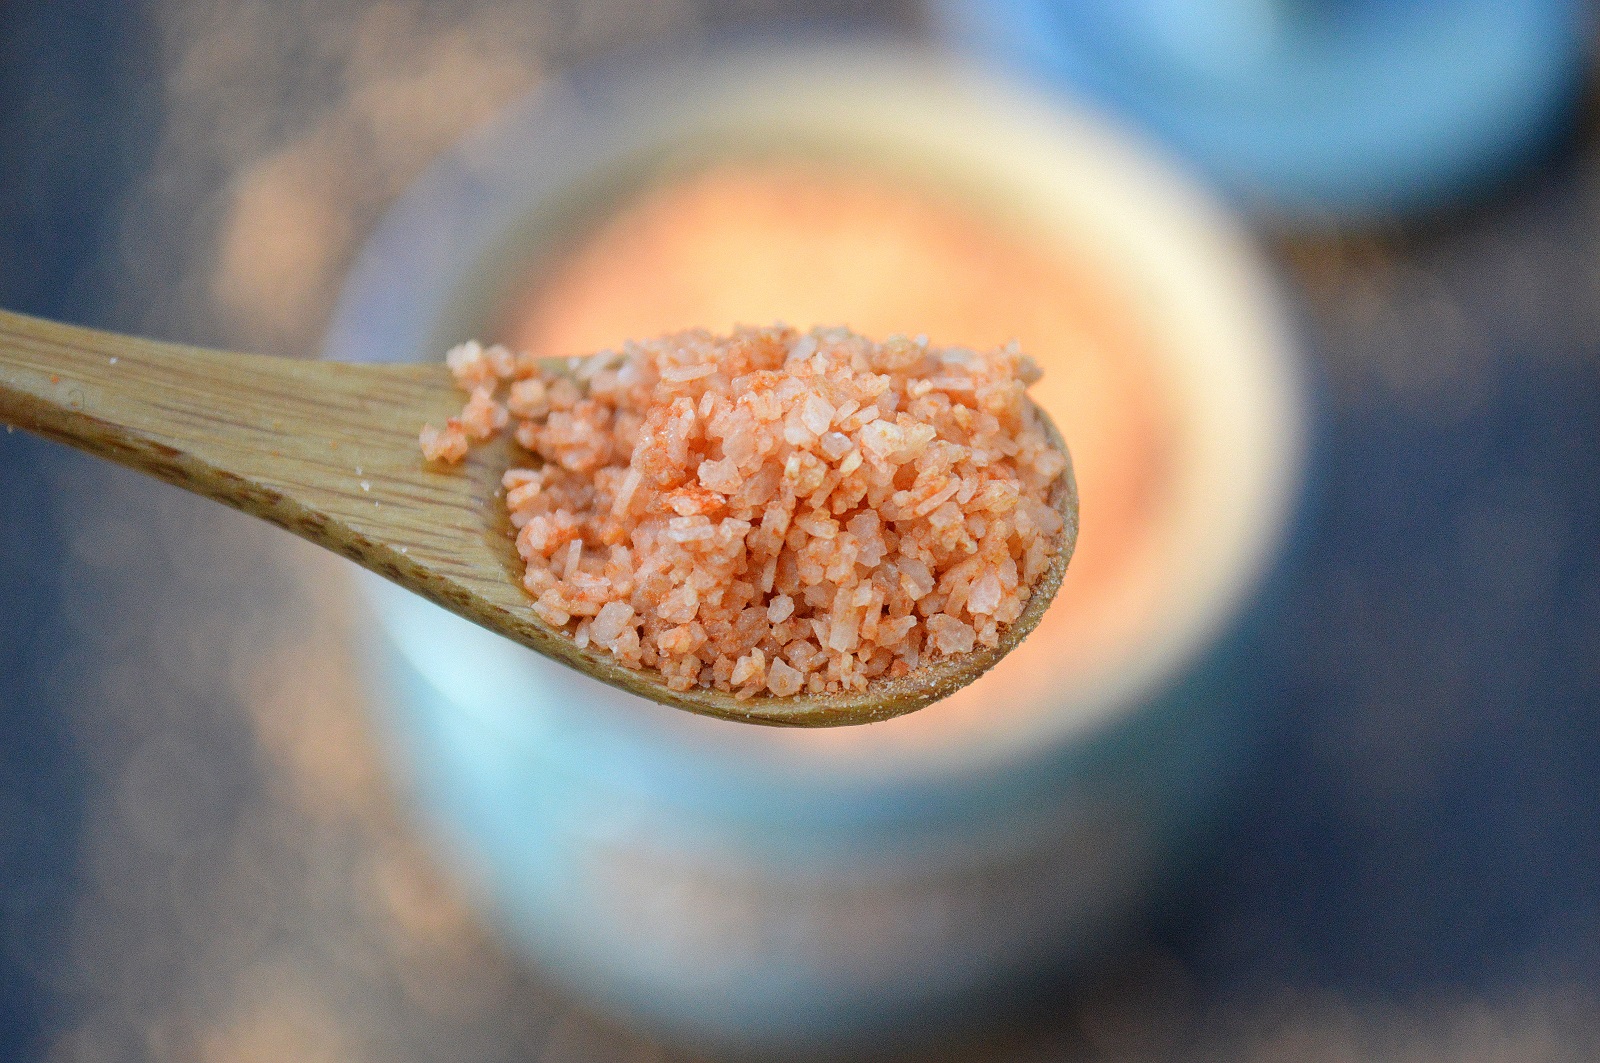 DIY Homemade Sriracha Salt makes a great hostess or holiday gift! It's a flavor explosion and just 2 ingredients!